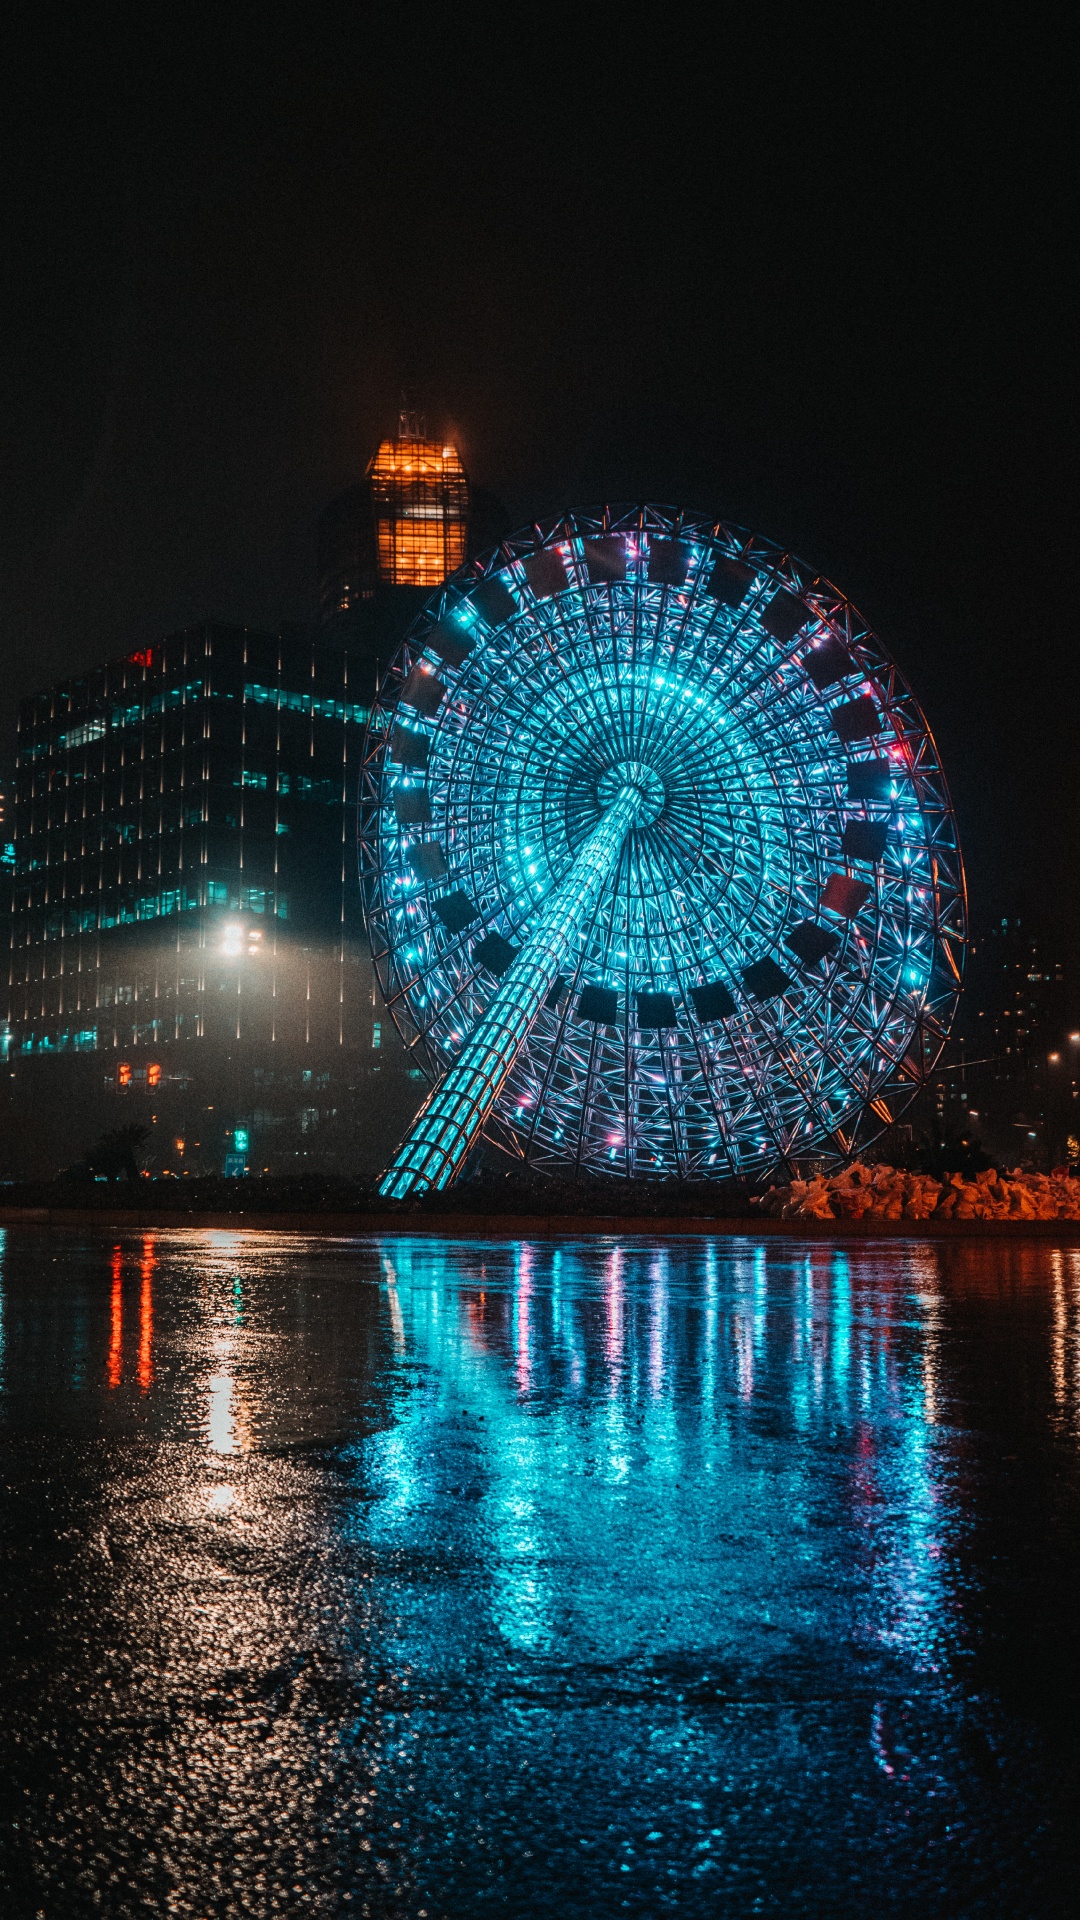 Blue and White Ferris Wheel During Night Time. Wallpaper in 1080x1920 Resolution